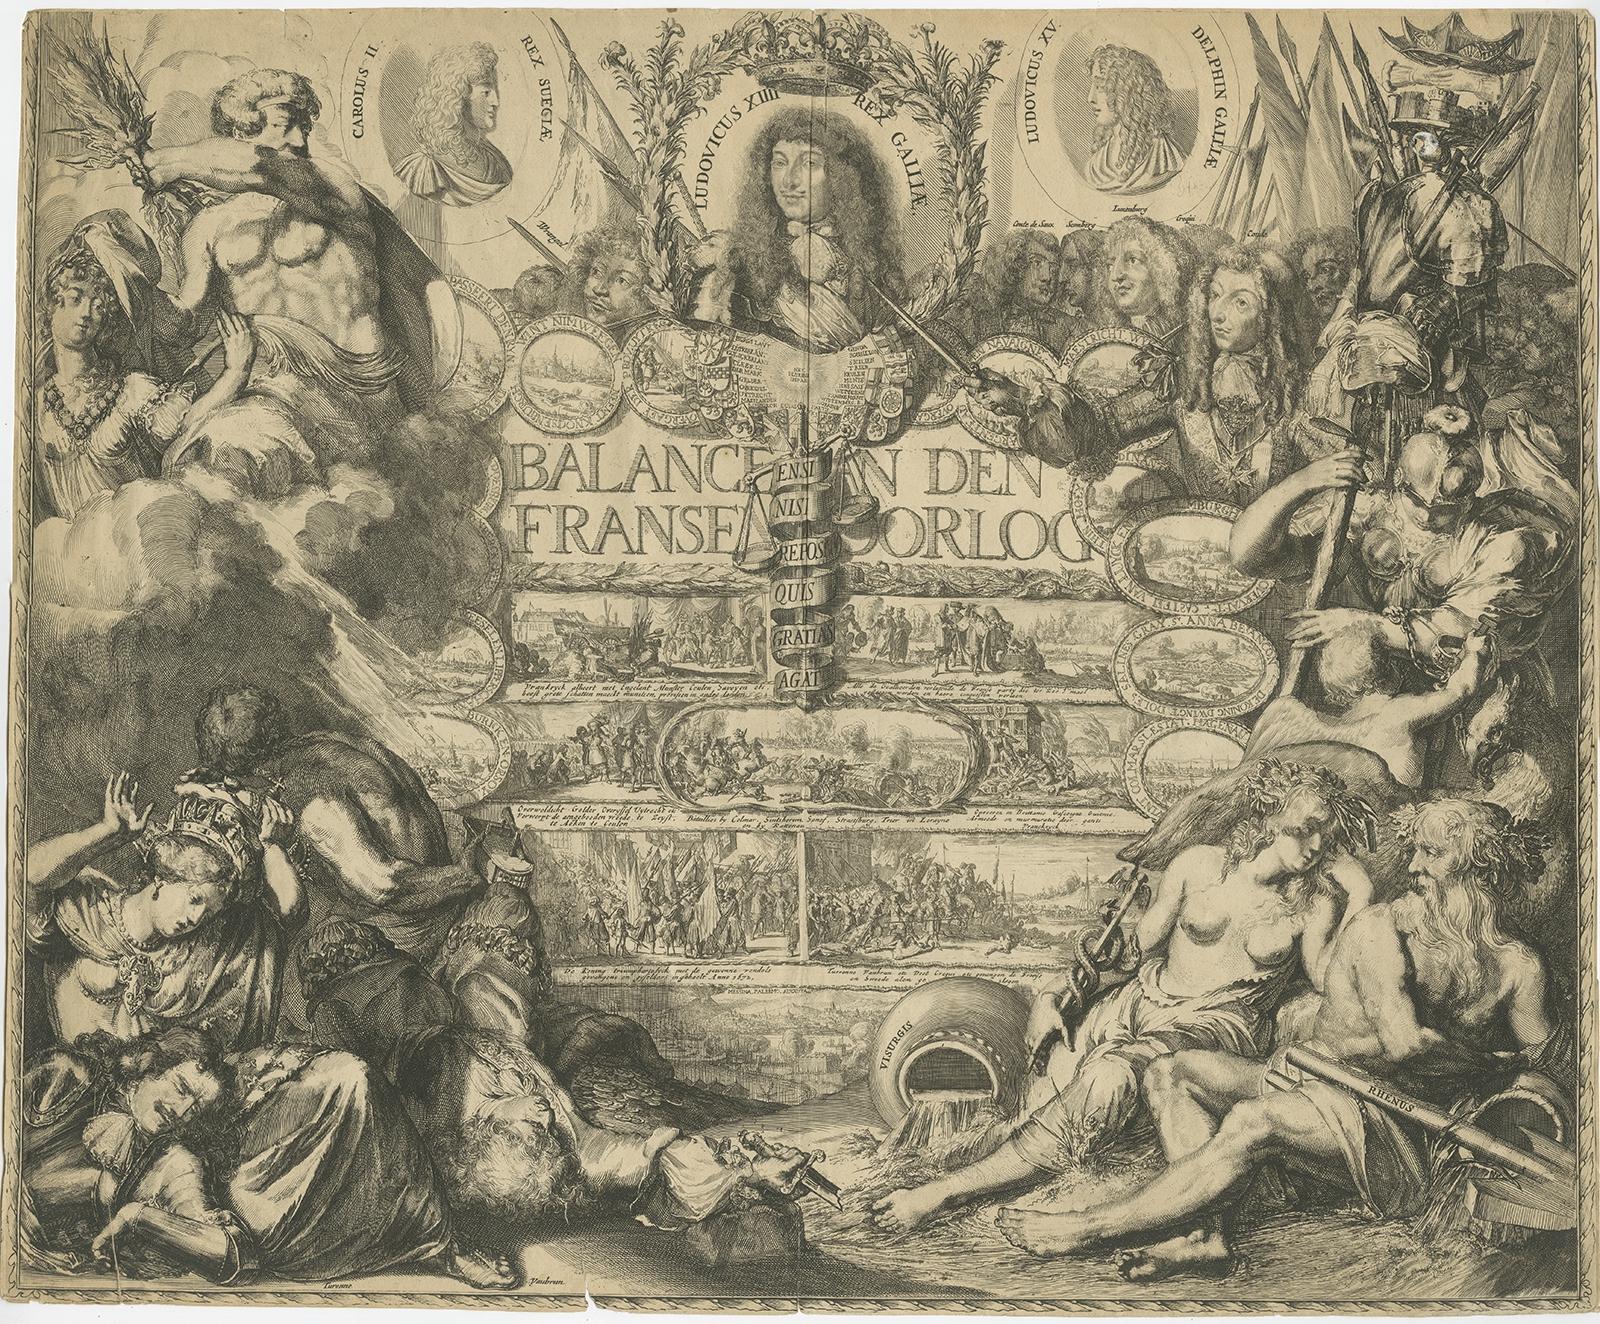 Antique print titled 'Balancen den Franse Oorlog'. 

Allegory of France and her allies at war; portrait of Louis XIV, flanked by those of Charles XI of Sweden and the Dauphin, above 7 small panels with battle scenes, 14 medallions representing